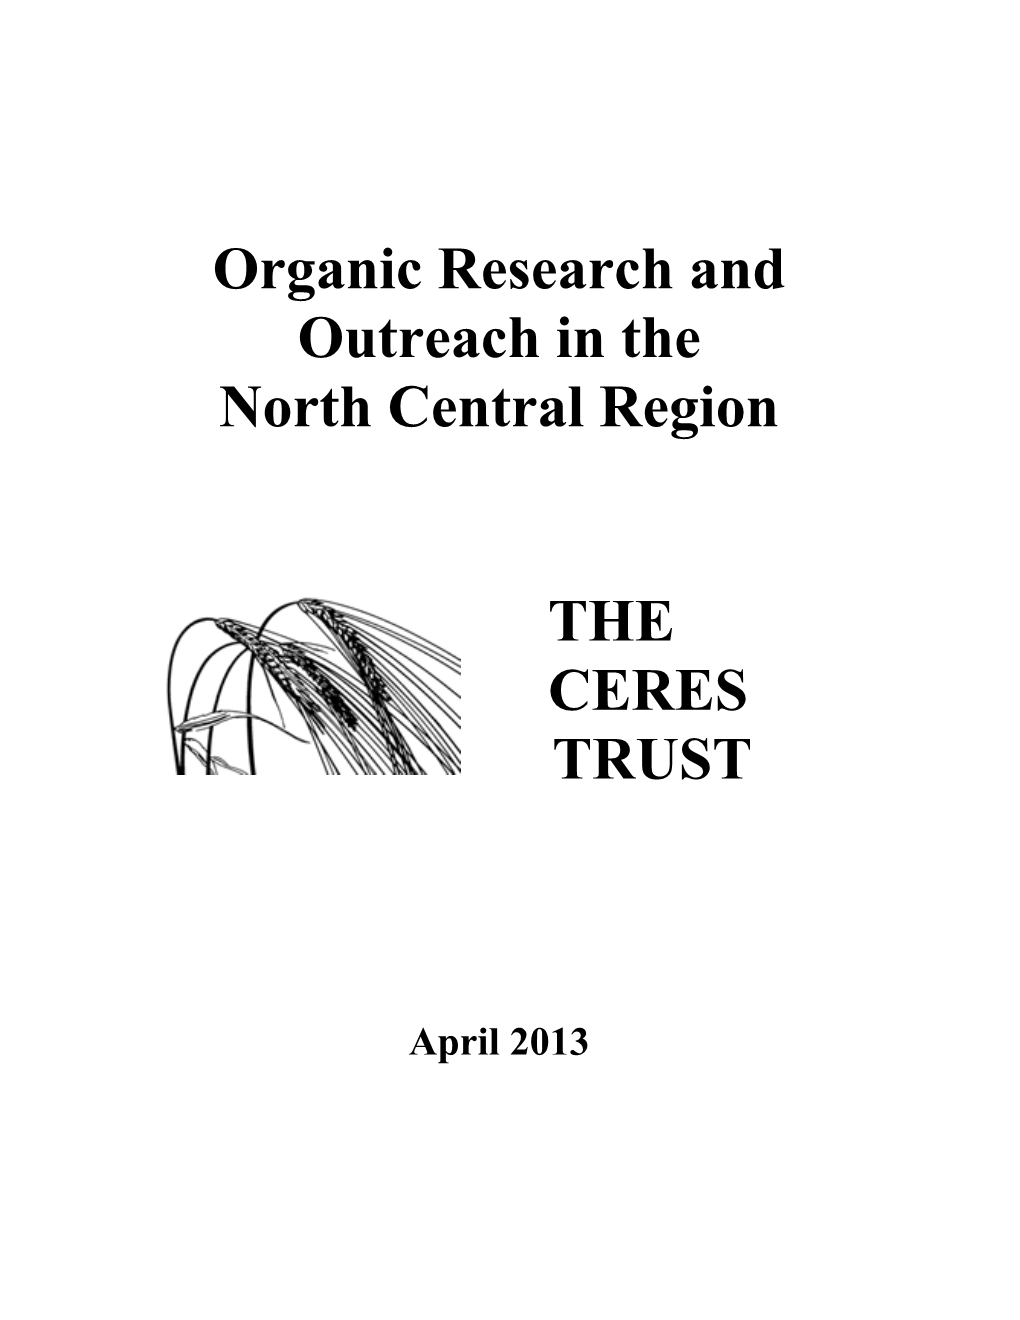 Organic Research and Outreach in the North Central Region